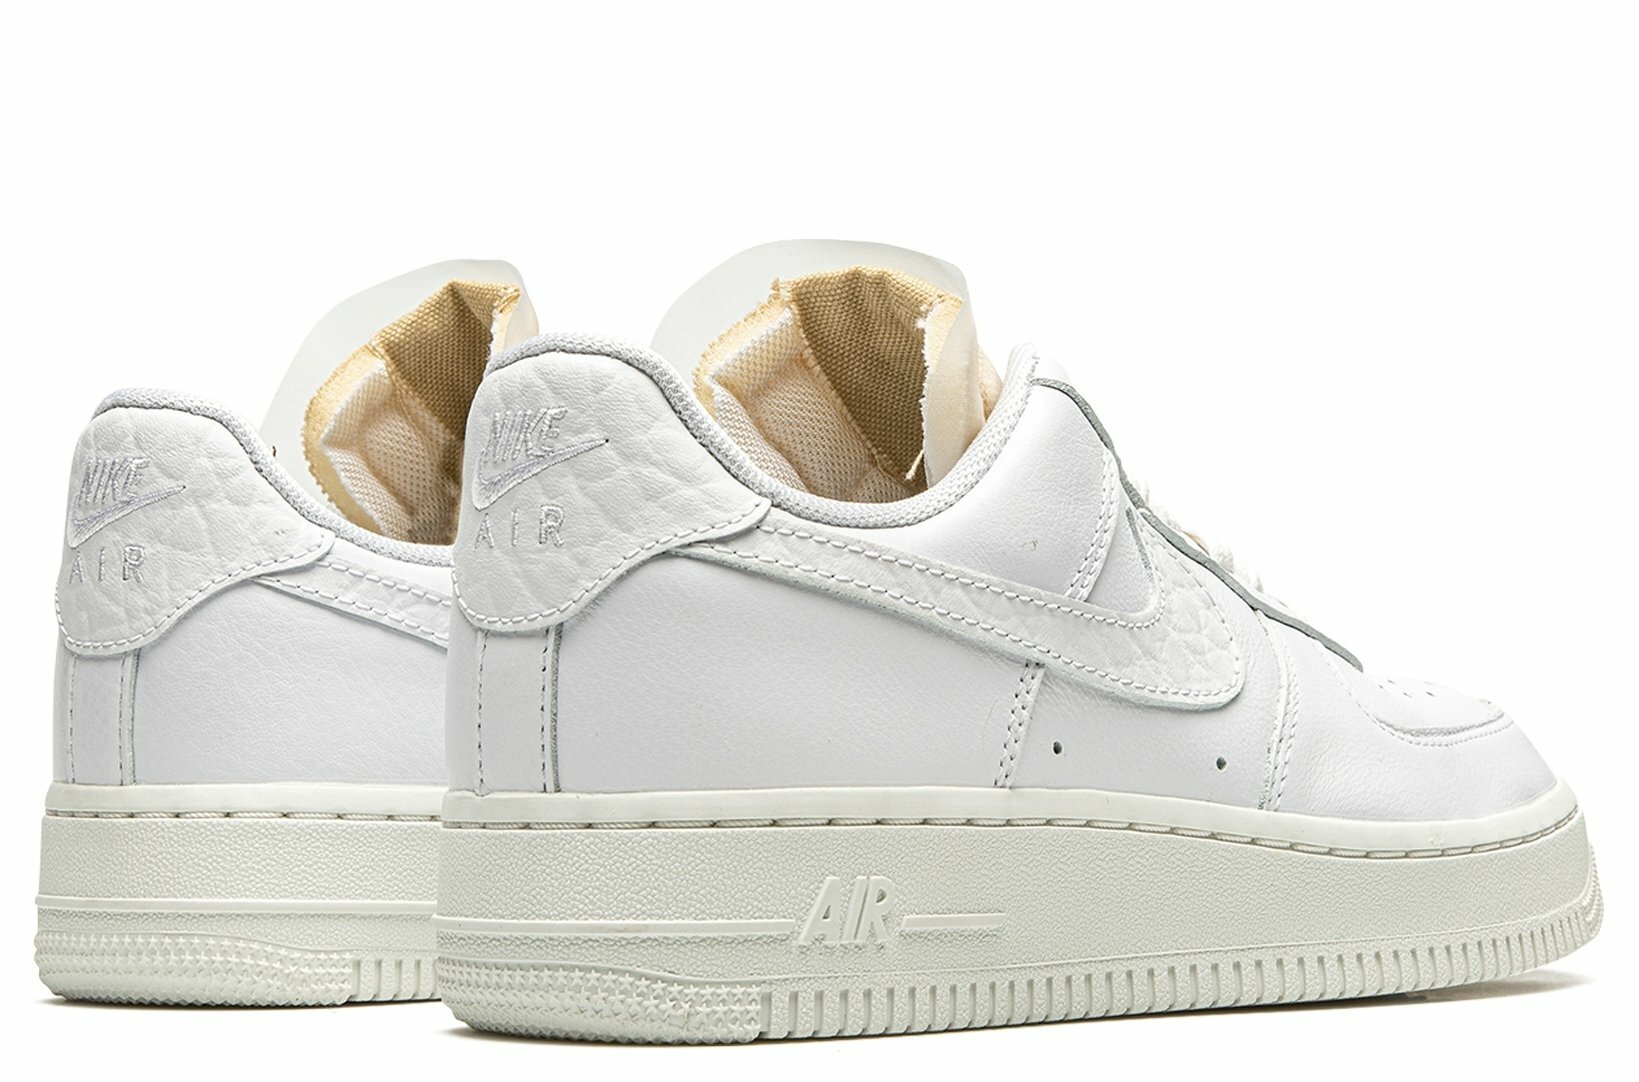 Air Force 1 Low '07 LX "Bling"